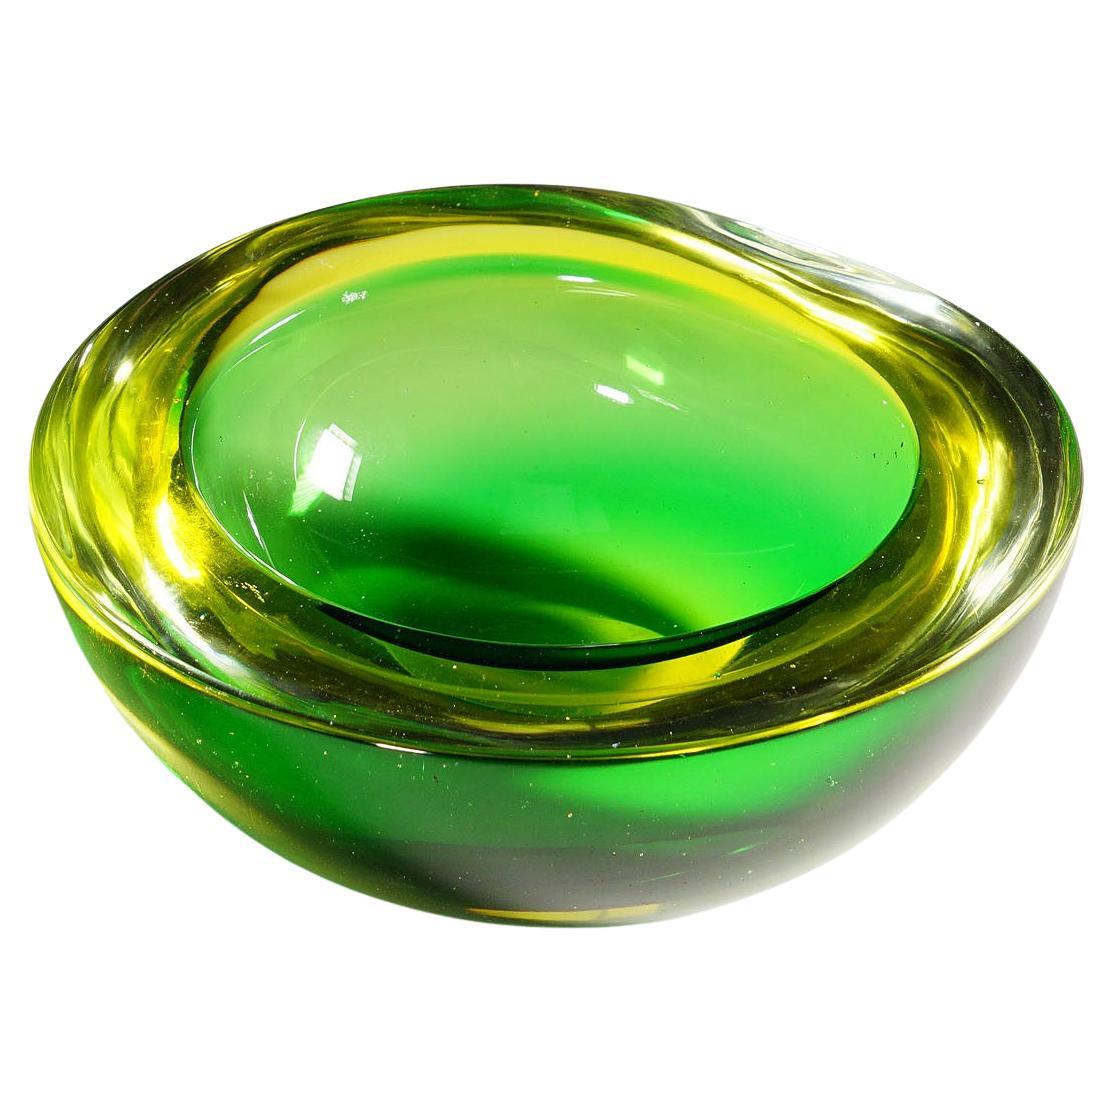 Archimede Seguso Geode Bowl in Green and Yellow, Murano Italy Ca. 1960s For Sale